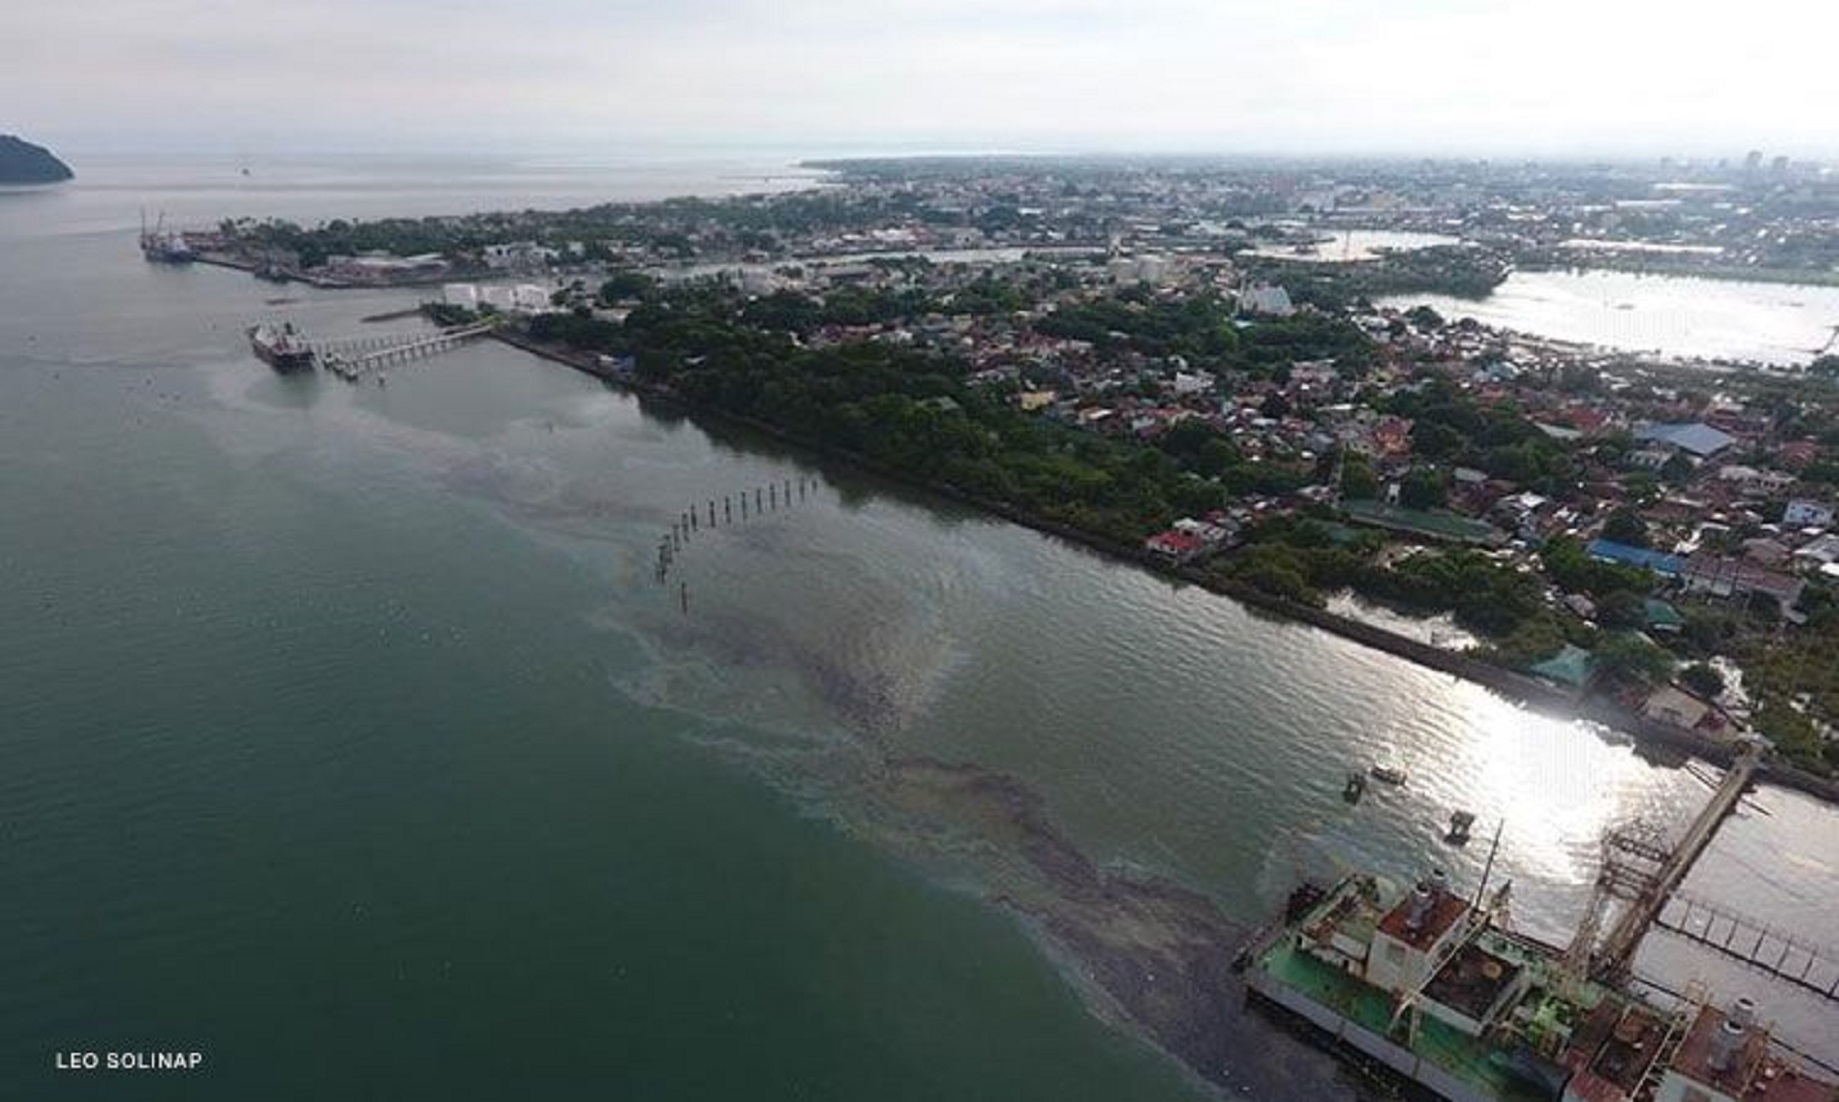 About 40,000 Litres Of Oil Spill After Power Barge Explosion In Central Philippines